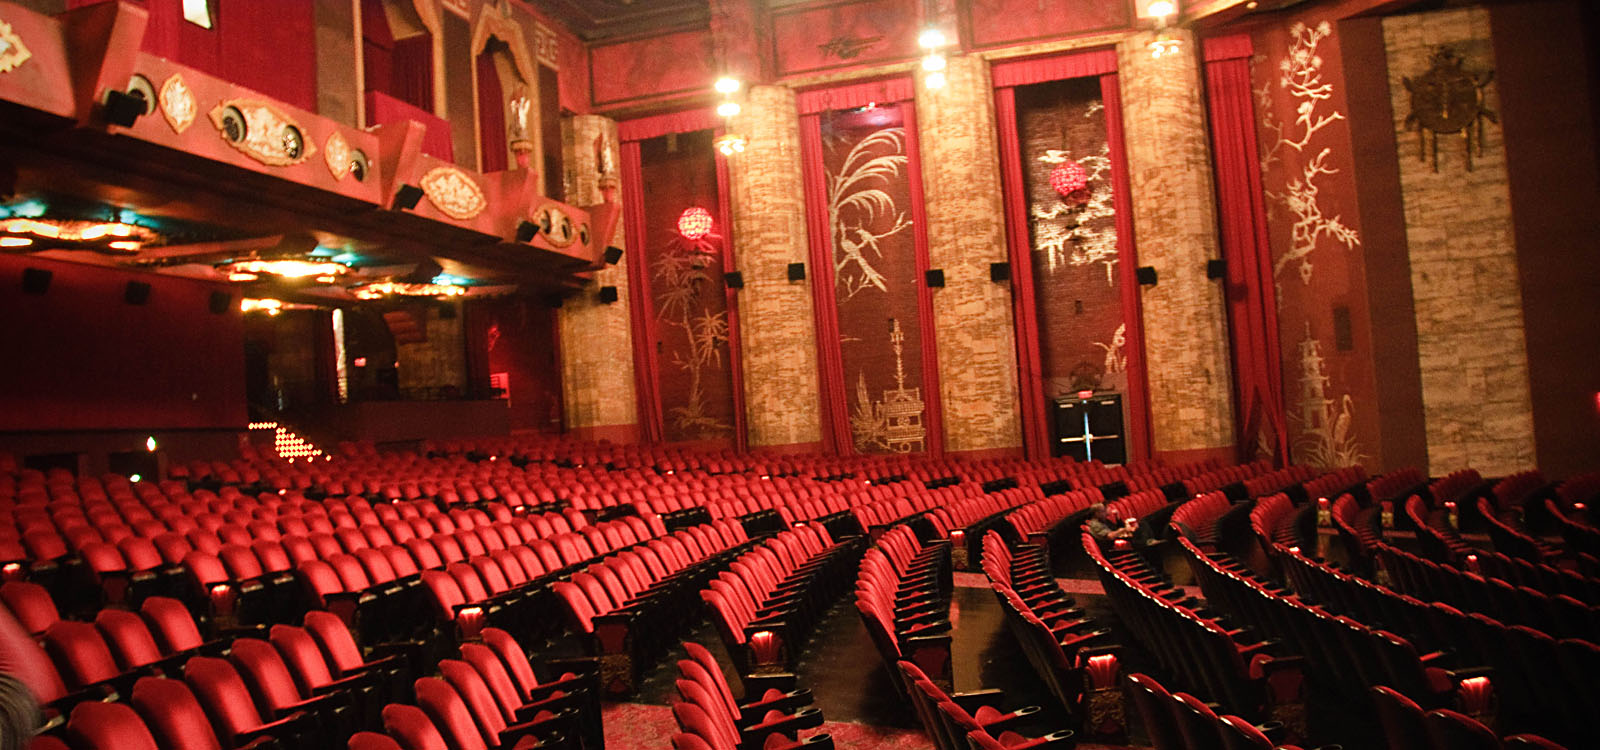 Top 10 Movie Theaters in LA That'll Make You Love Cinema Again